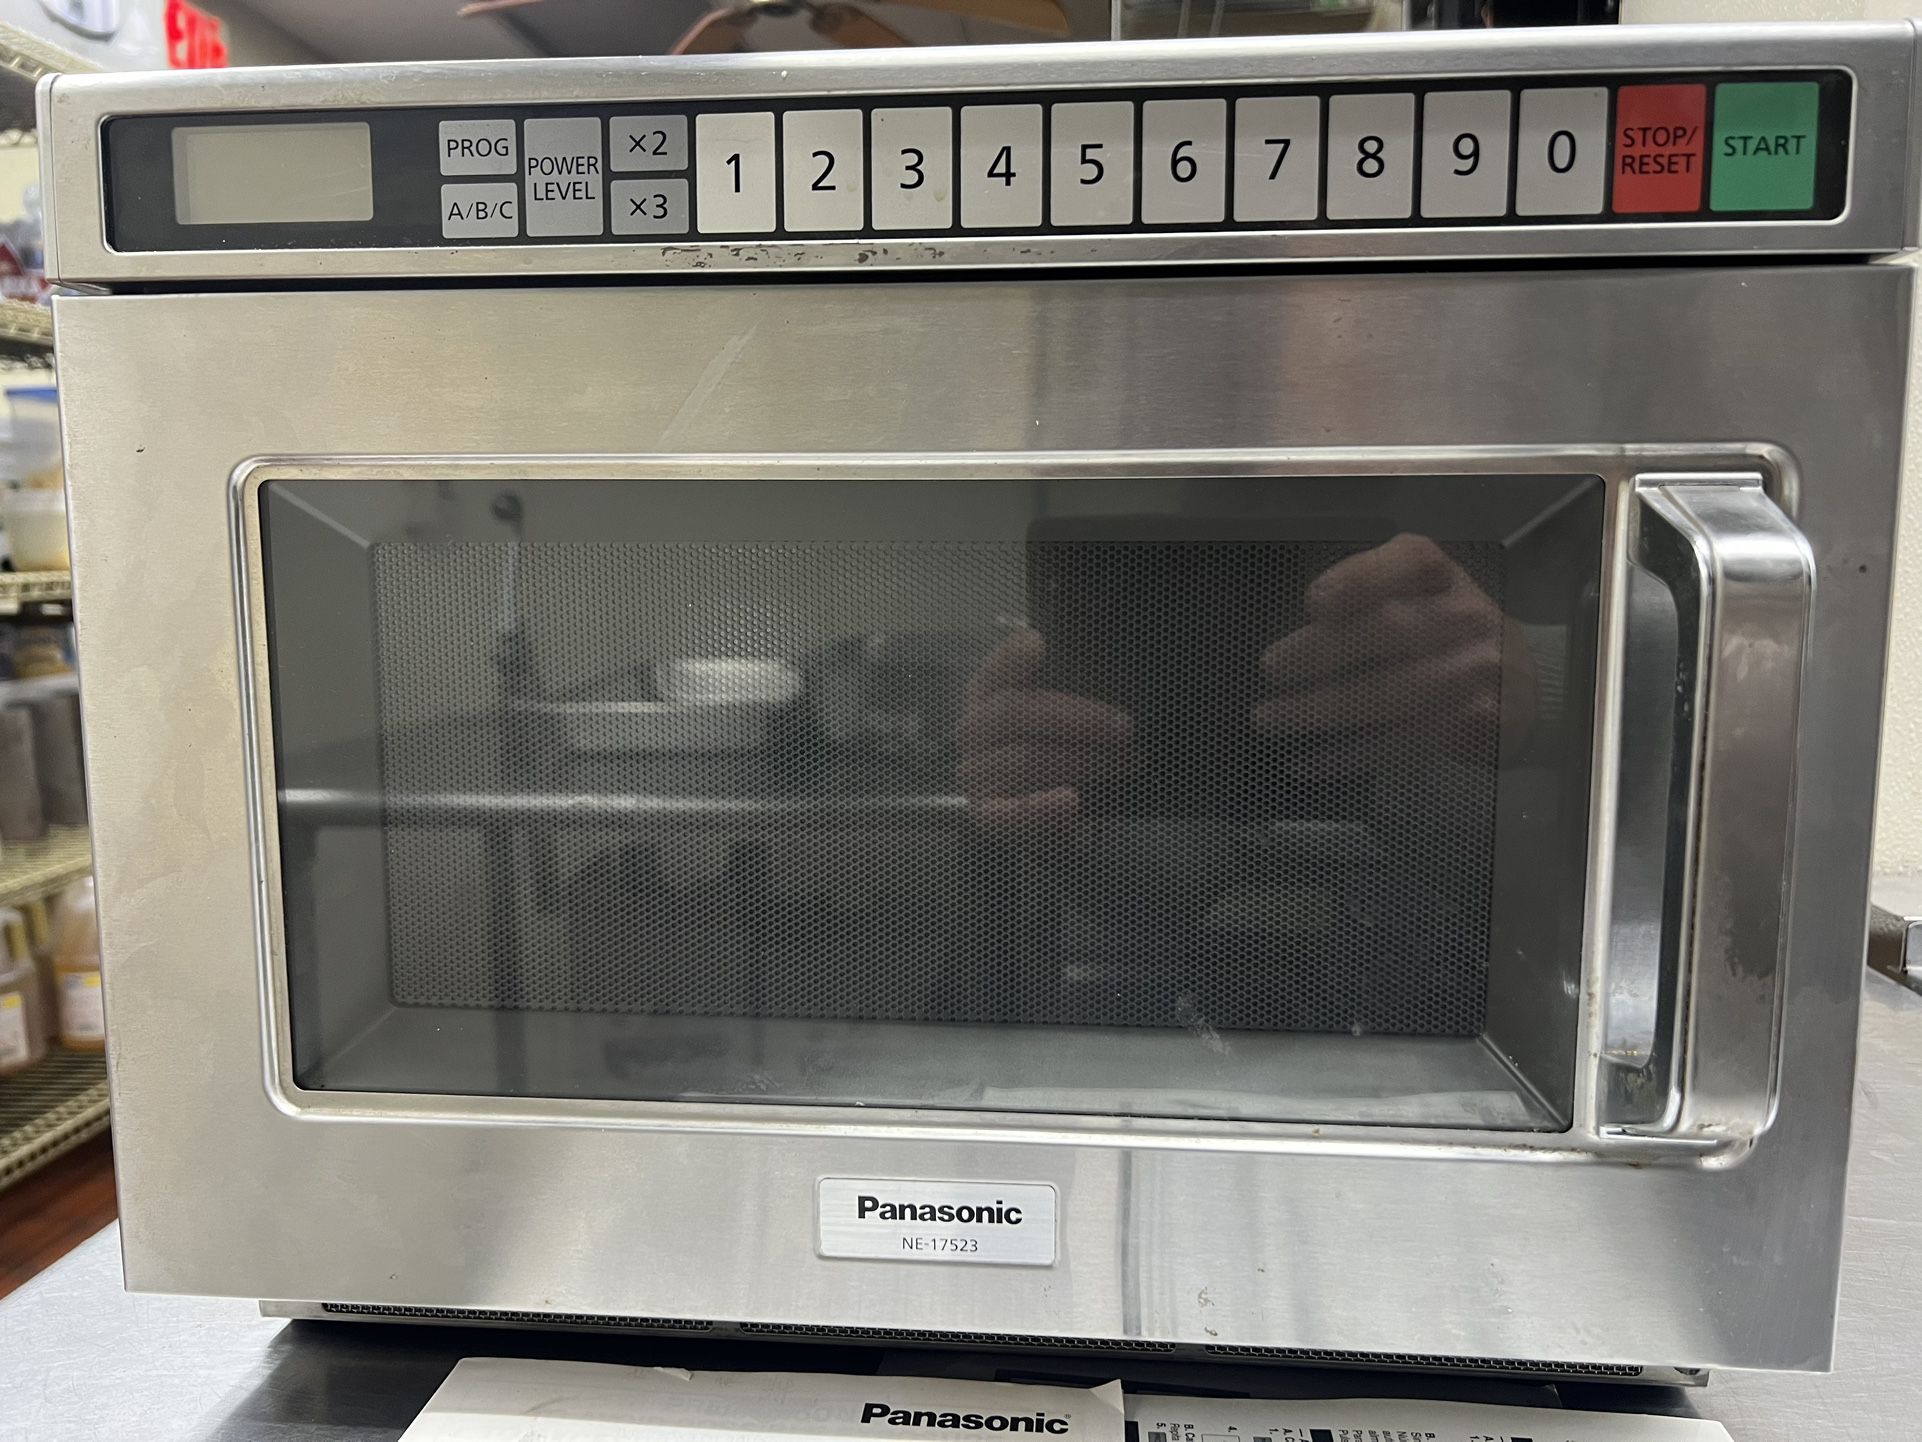  Commercial Series NE-17523 Commercial Microwave Oven